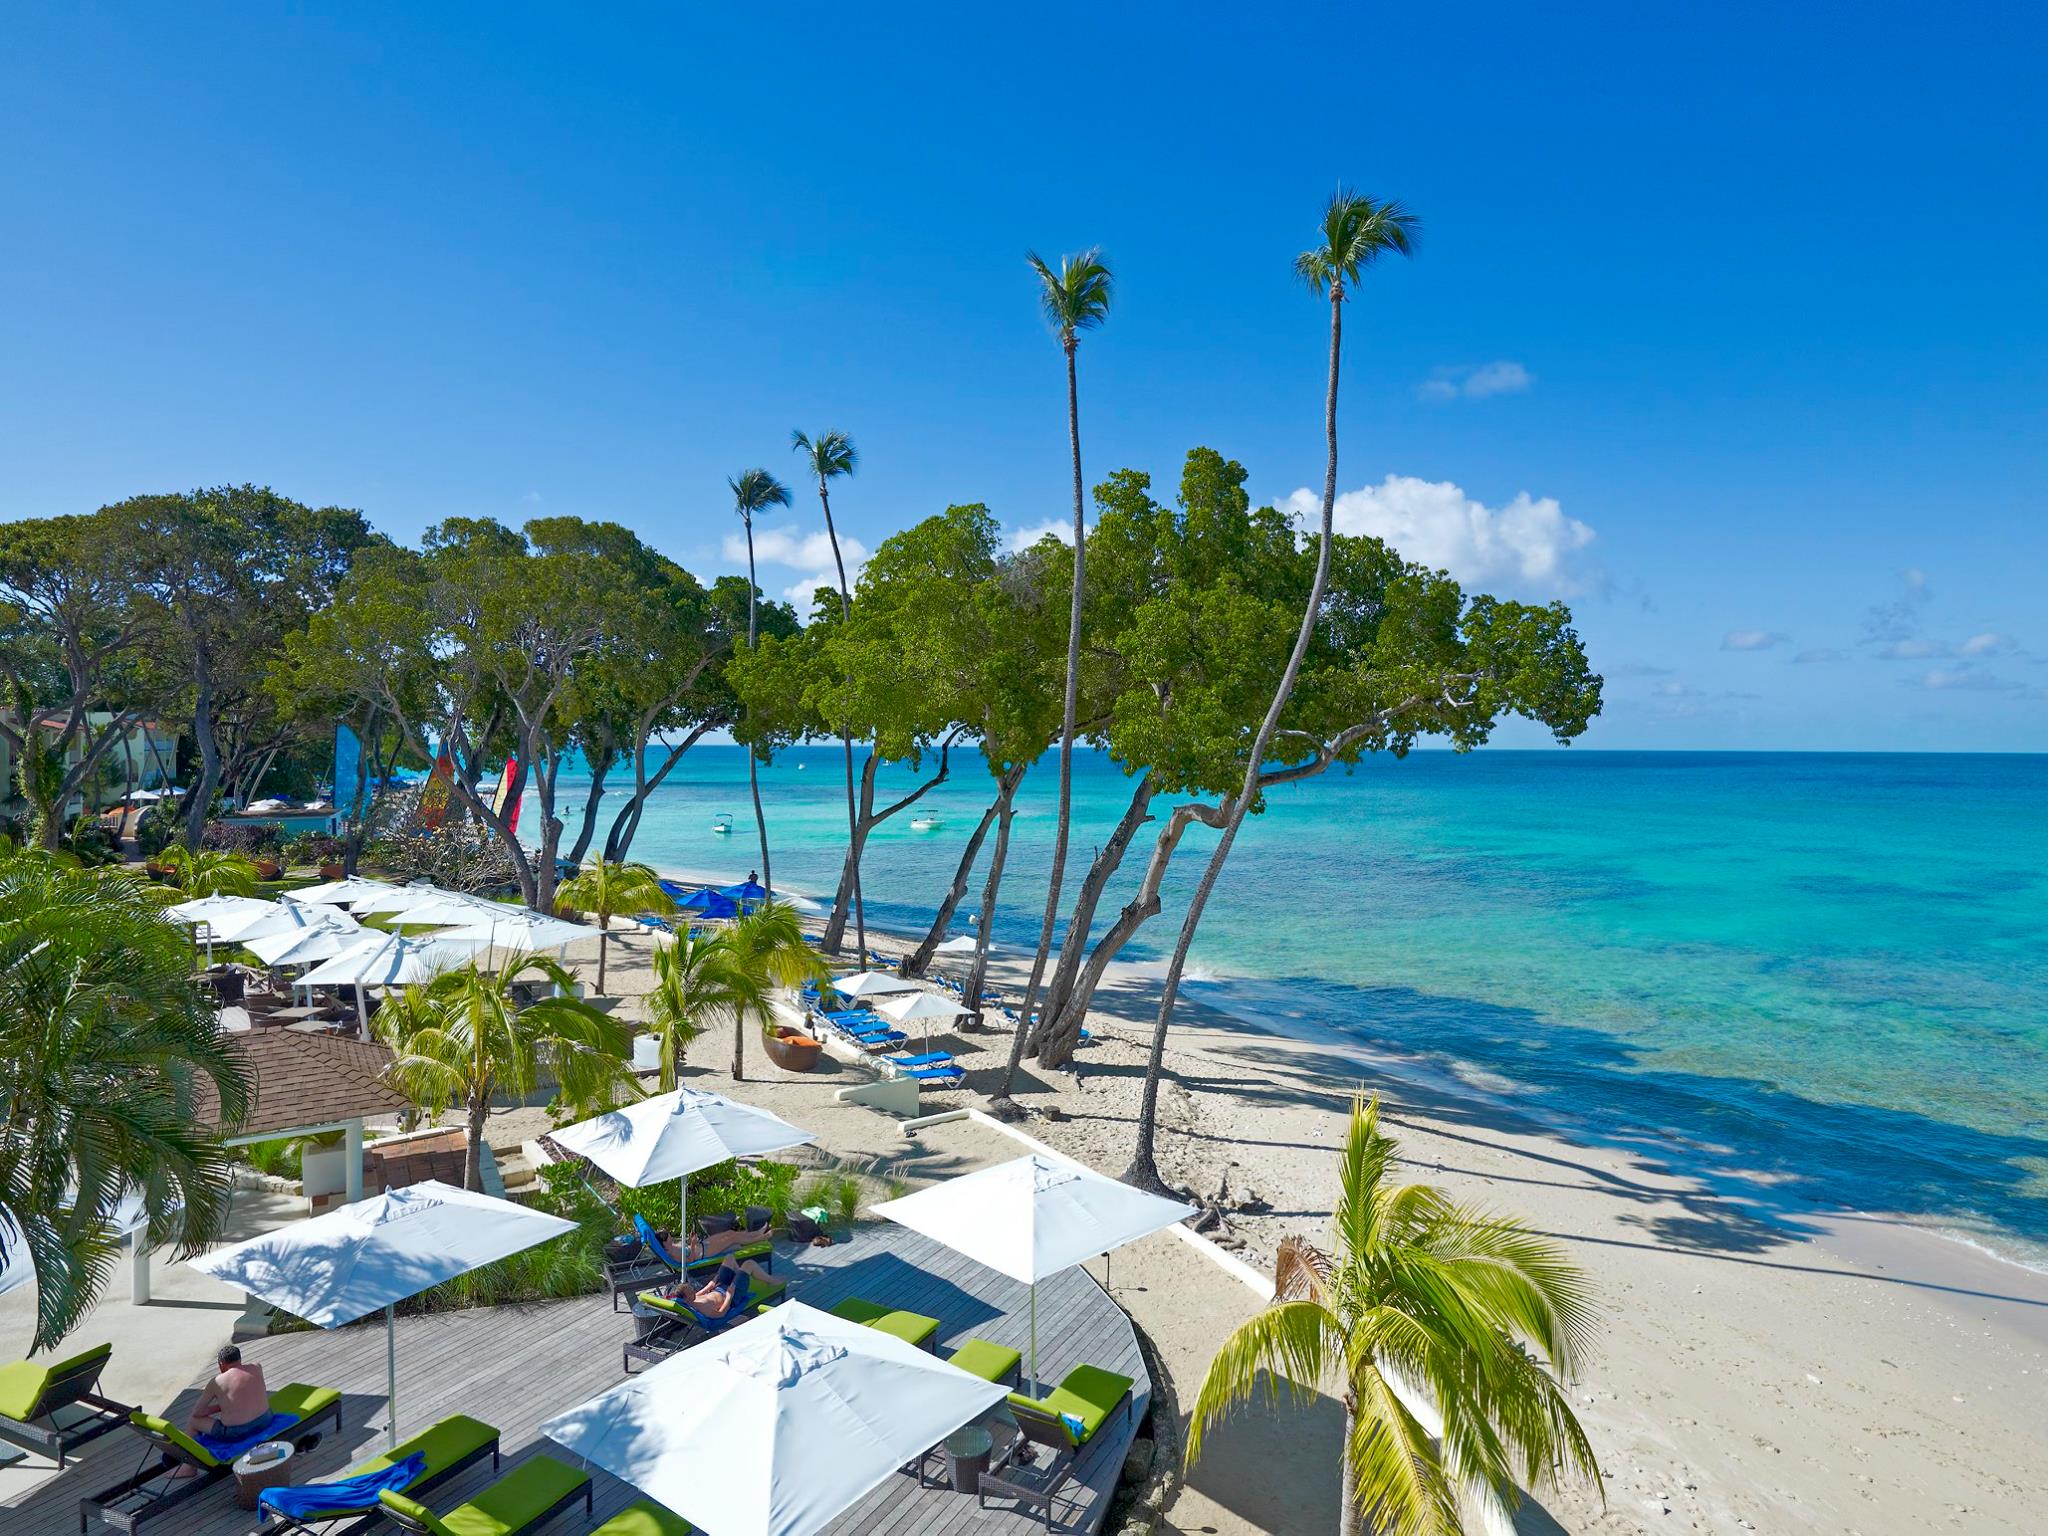 Elegant Hotels of Barbados offers a unique collection of six luxury beachfront hotels on the island.